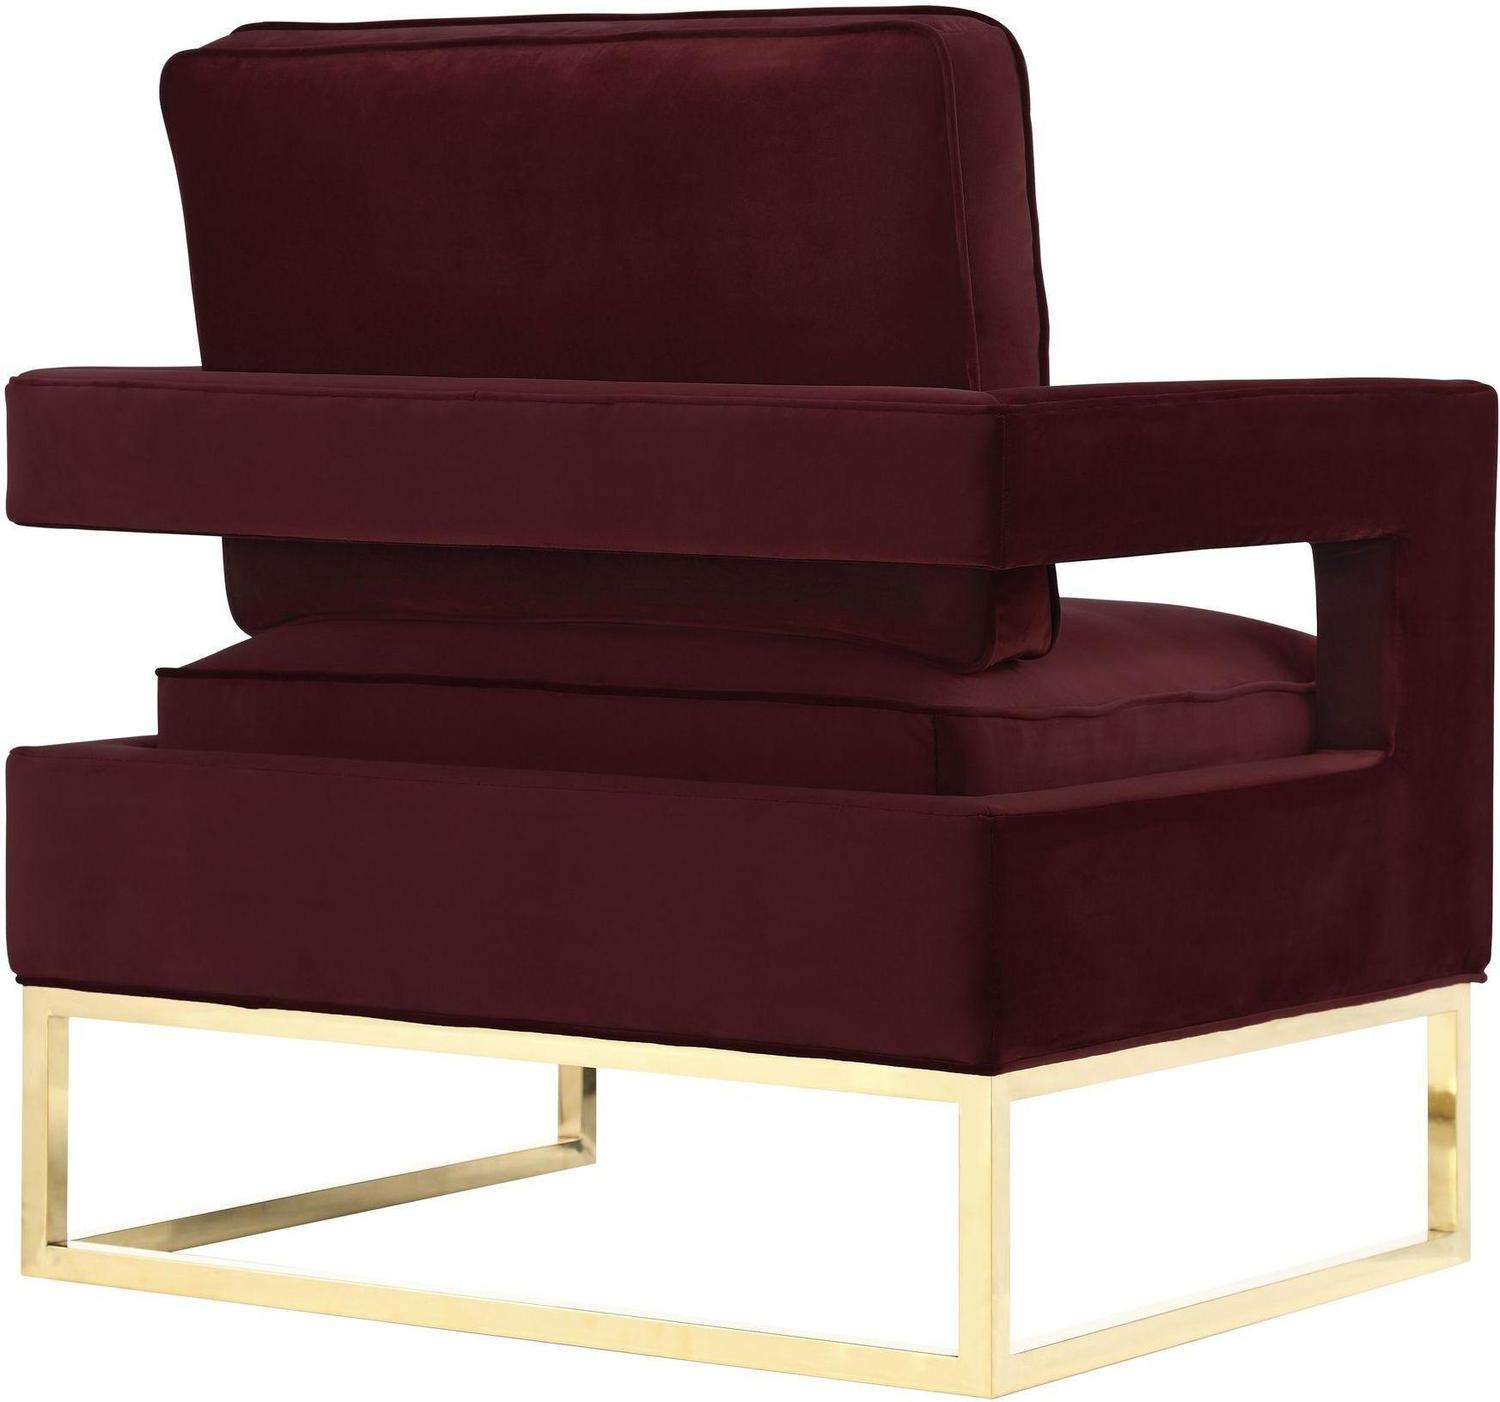 lodge chair Contemporary Design Furniture Accent Chairs Maroon